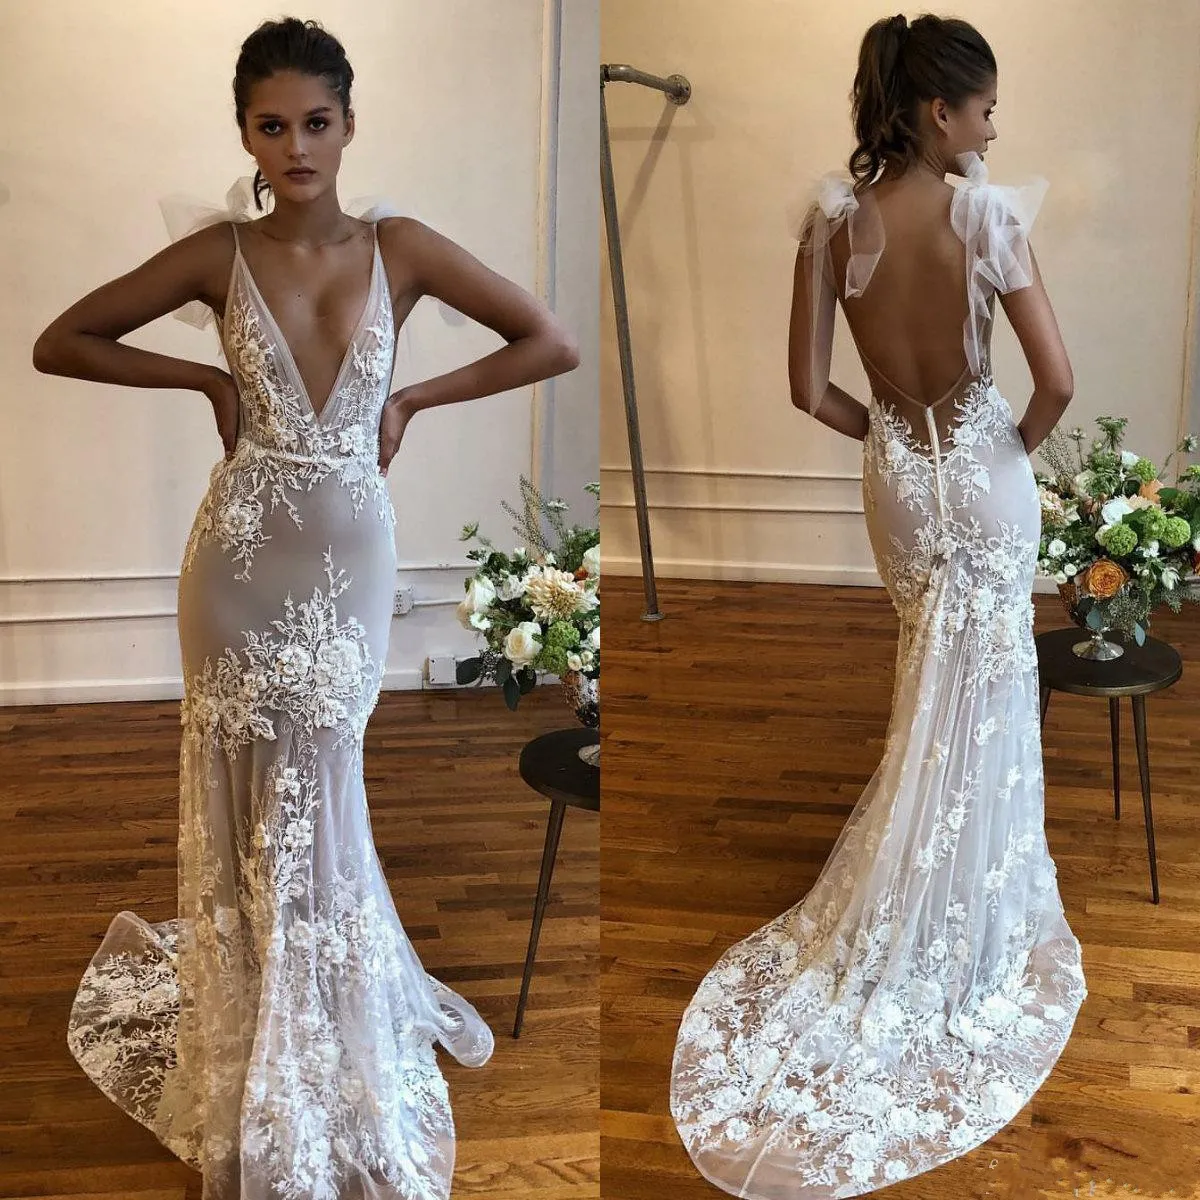 Dresses Sexy Berta Deep V Neck d Floral Appliqued Lace Bridal Gowns Backless Beach Country Wedding Dress Applique Brial Weing